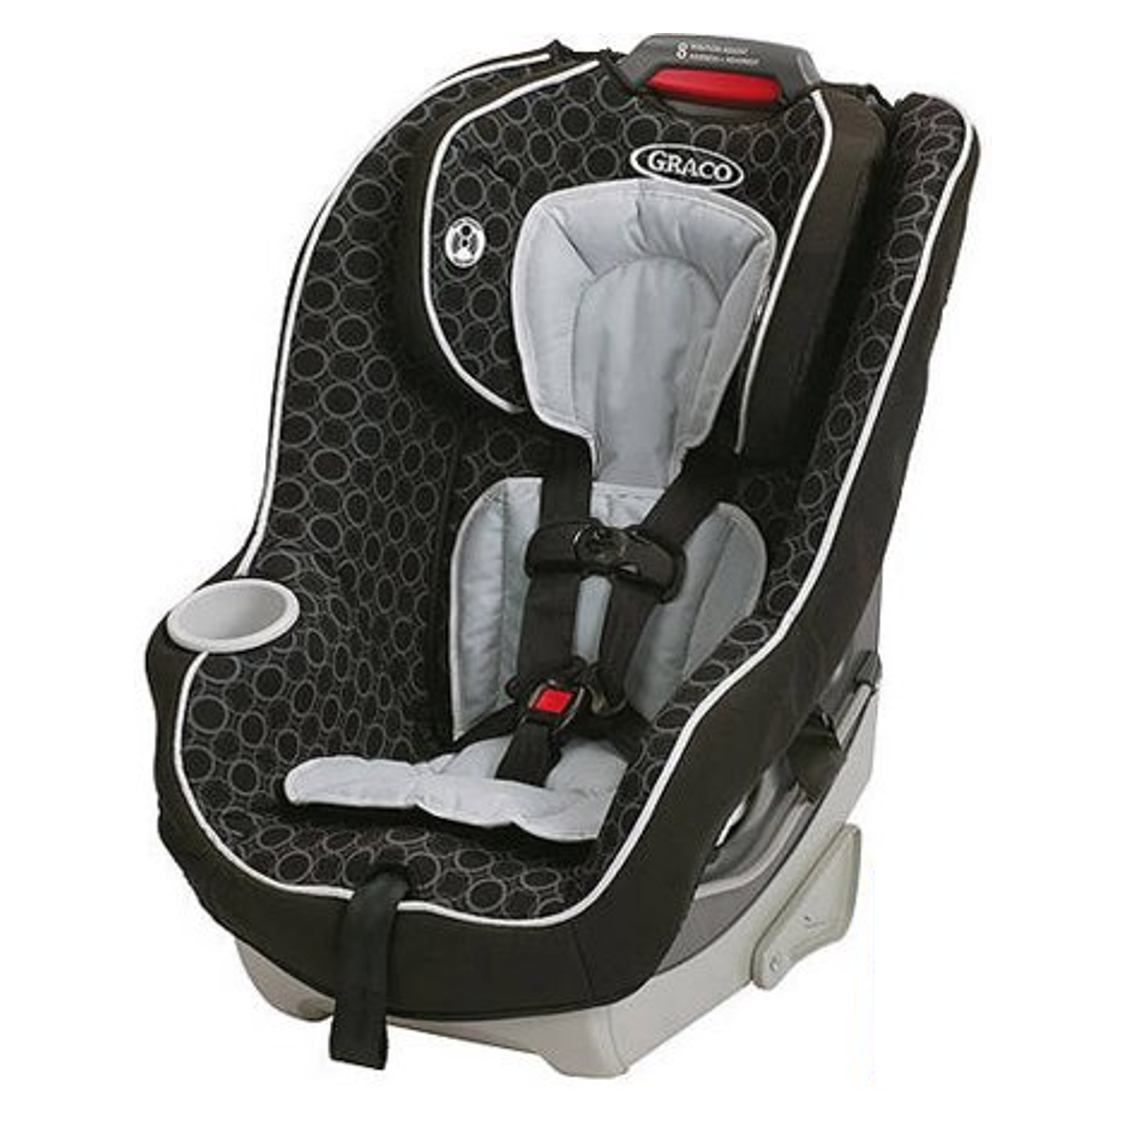 Graco Contender 65 Convertible Car Seat, Black Carbon - image 1 of 10